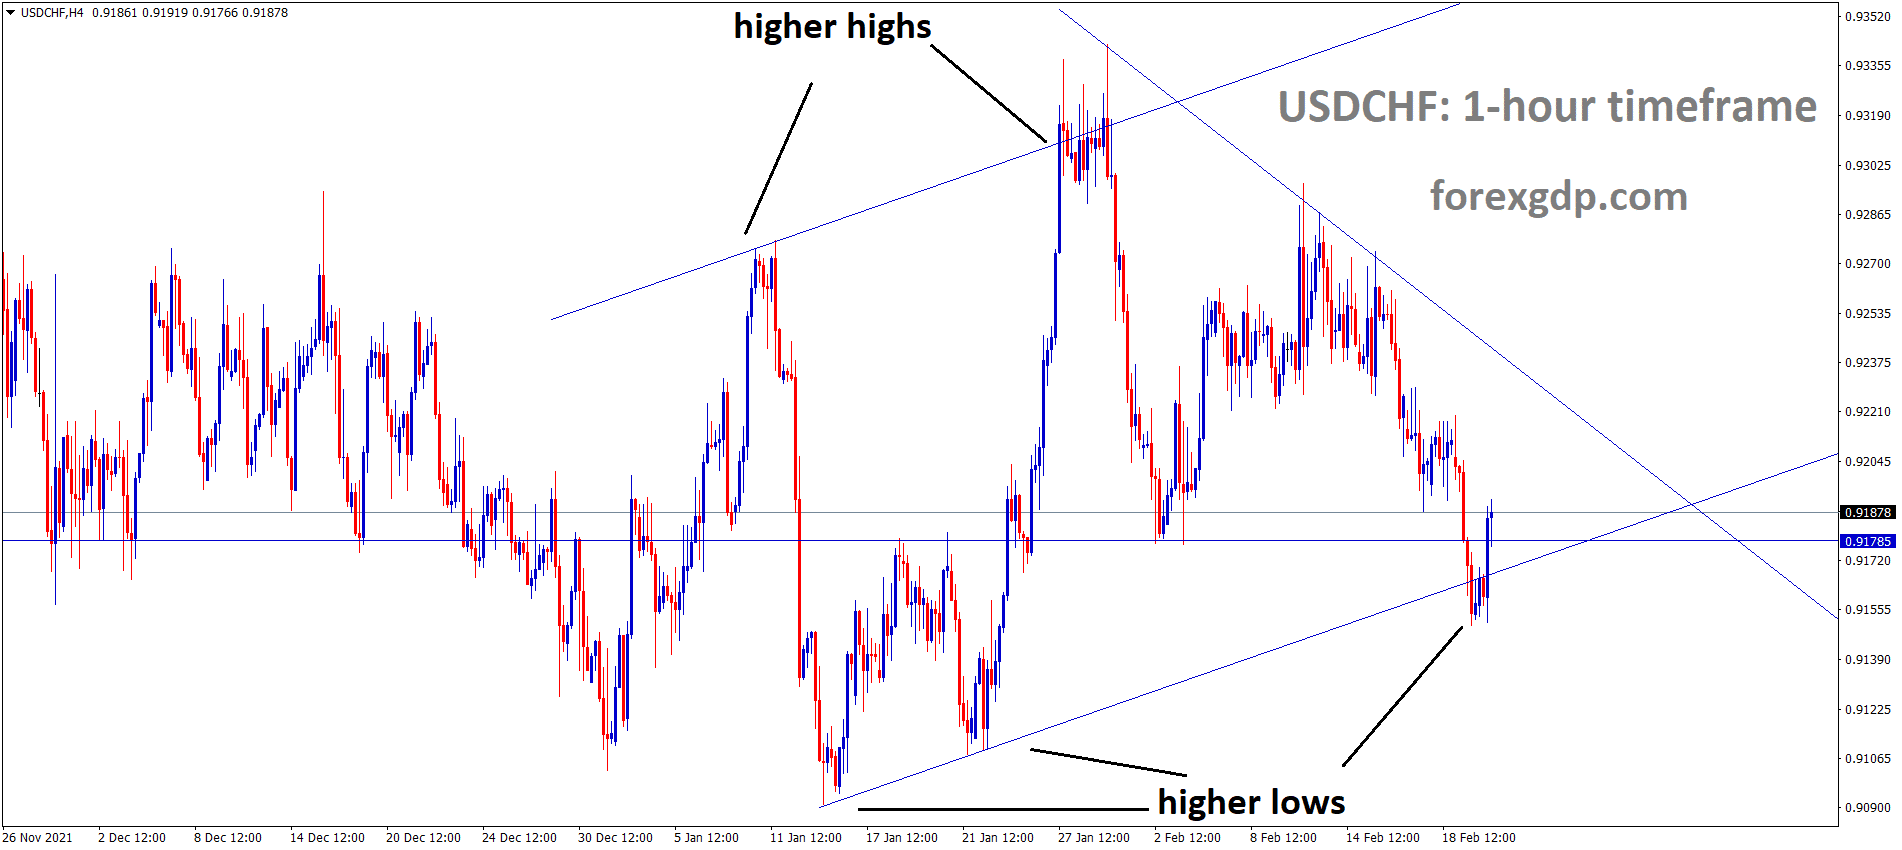 USDCHF is moving in an ascending channel and the market has to rebound from the higher low area of the channel.